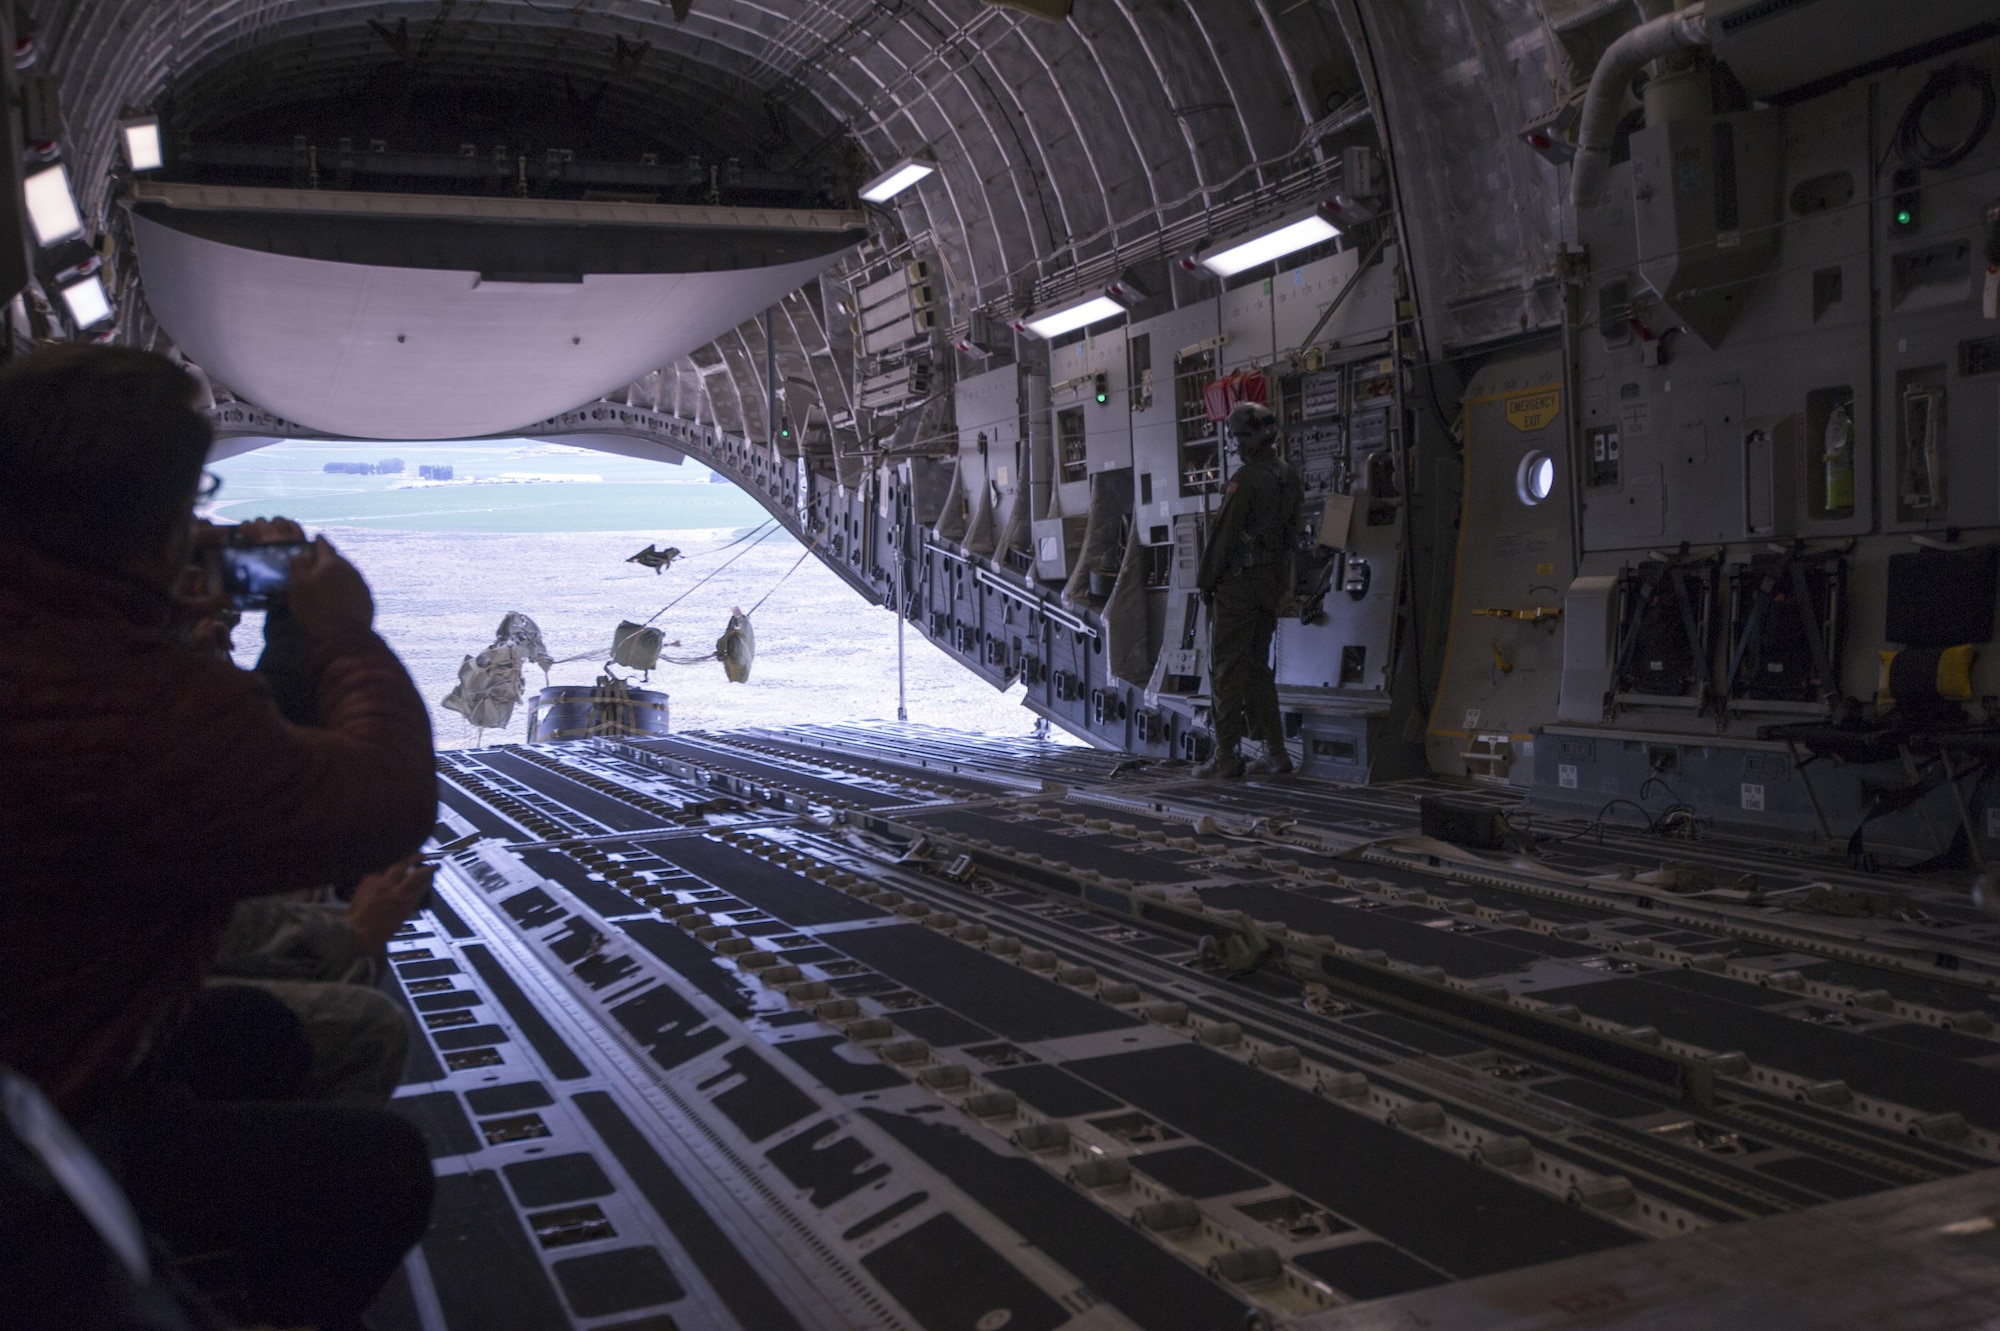 Pallets roll out of the back of a C-17 Globemaster III during an airdrop June 3, 2017, while aboard a training flight as part of Employer Orientation Day at McChord Field. Reservists invited their employers out for a day to learn and experience life in the Air Force Reserve. Employers went through a deployment processing line and took part in a training flight aboard a C-17 Globemaster III, which included an airdrop. (U.S. Air Force photo by Tech. Sgt. Bryan Hull)